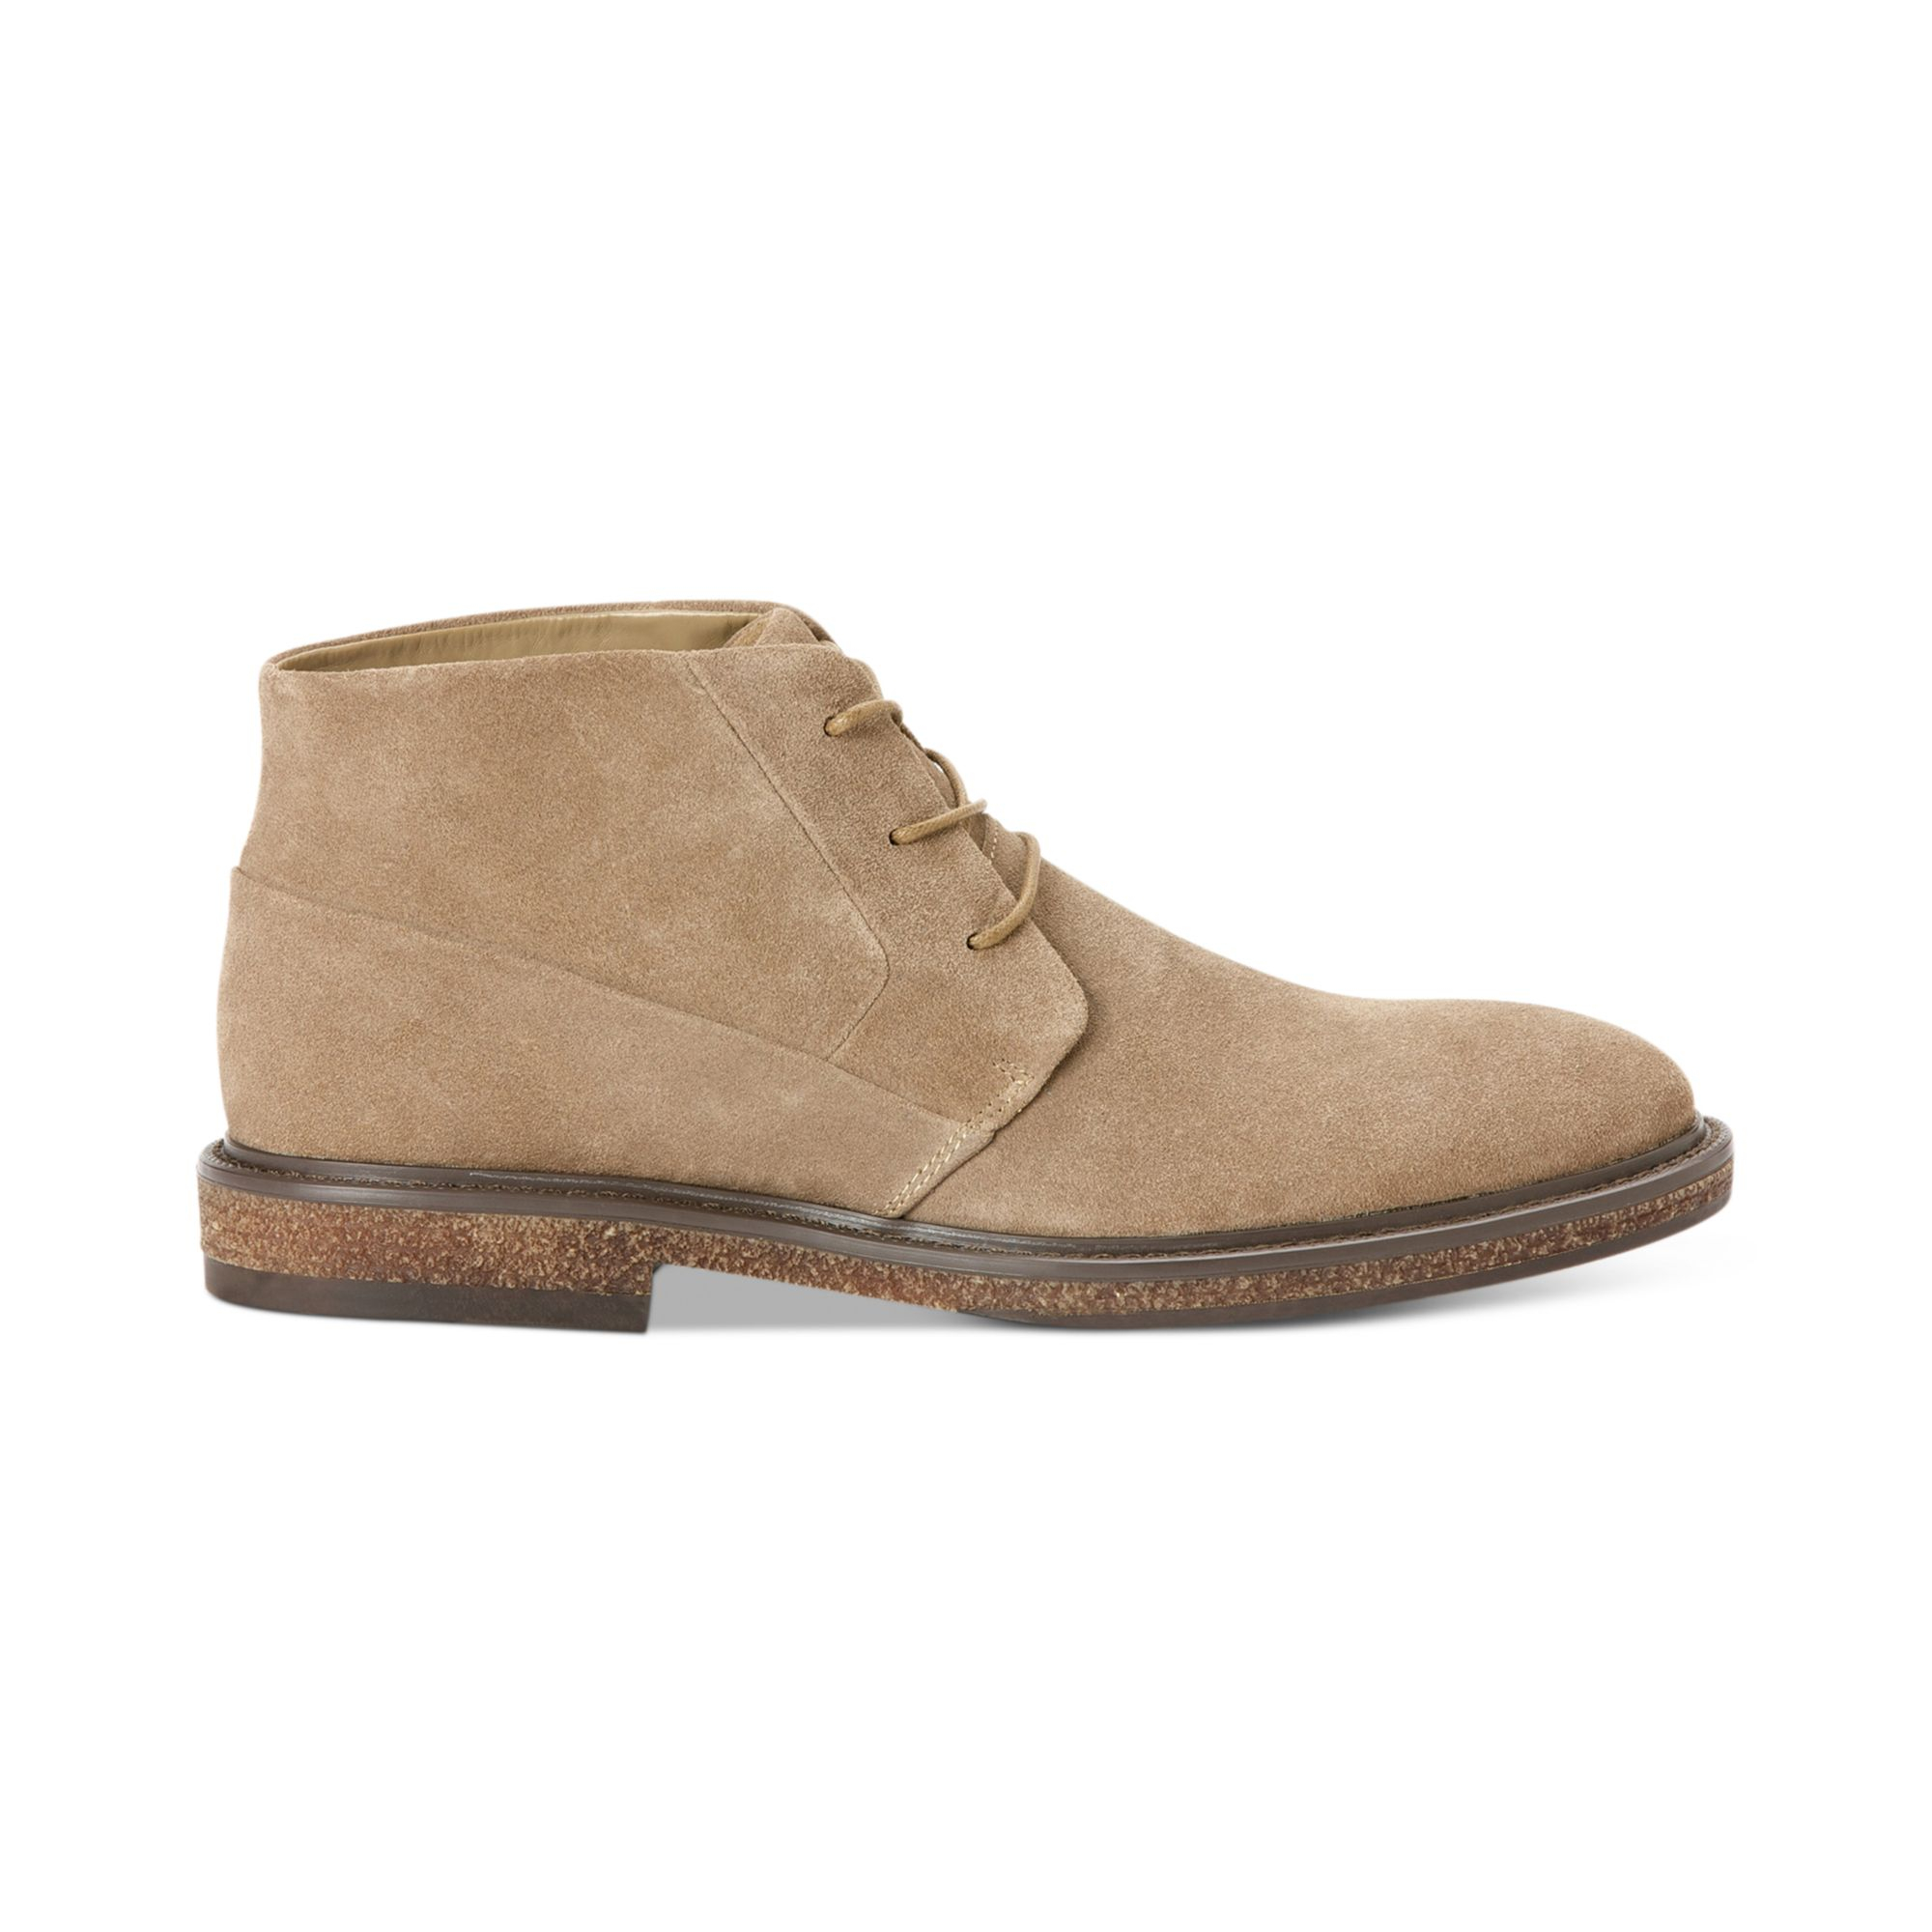 Calvin Klein Phillip Chukka Boots in Taupe/Beige (Natural) for Men | Lyst